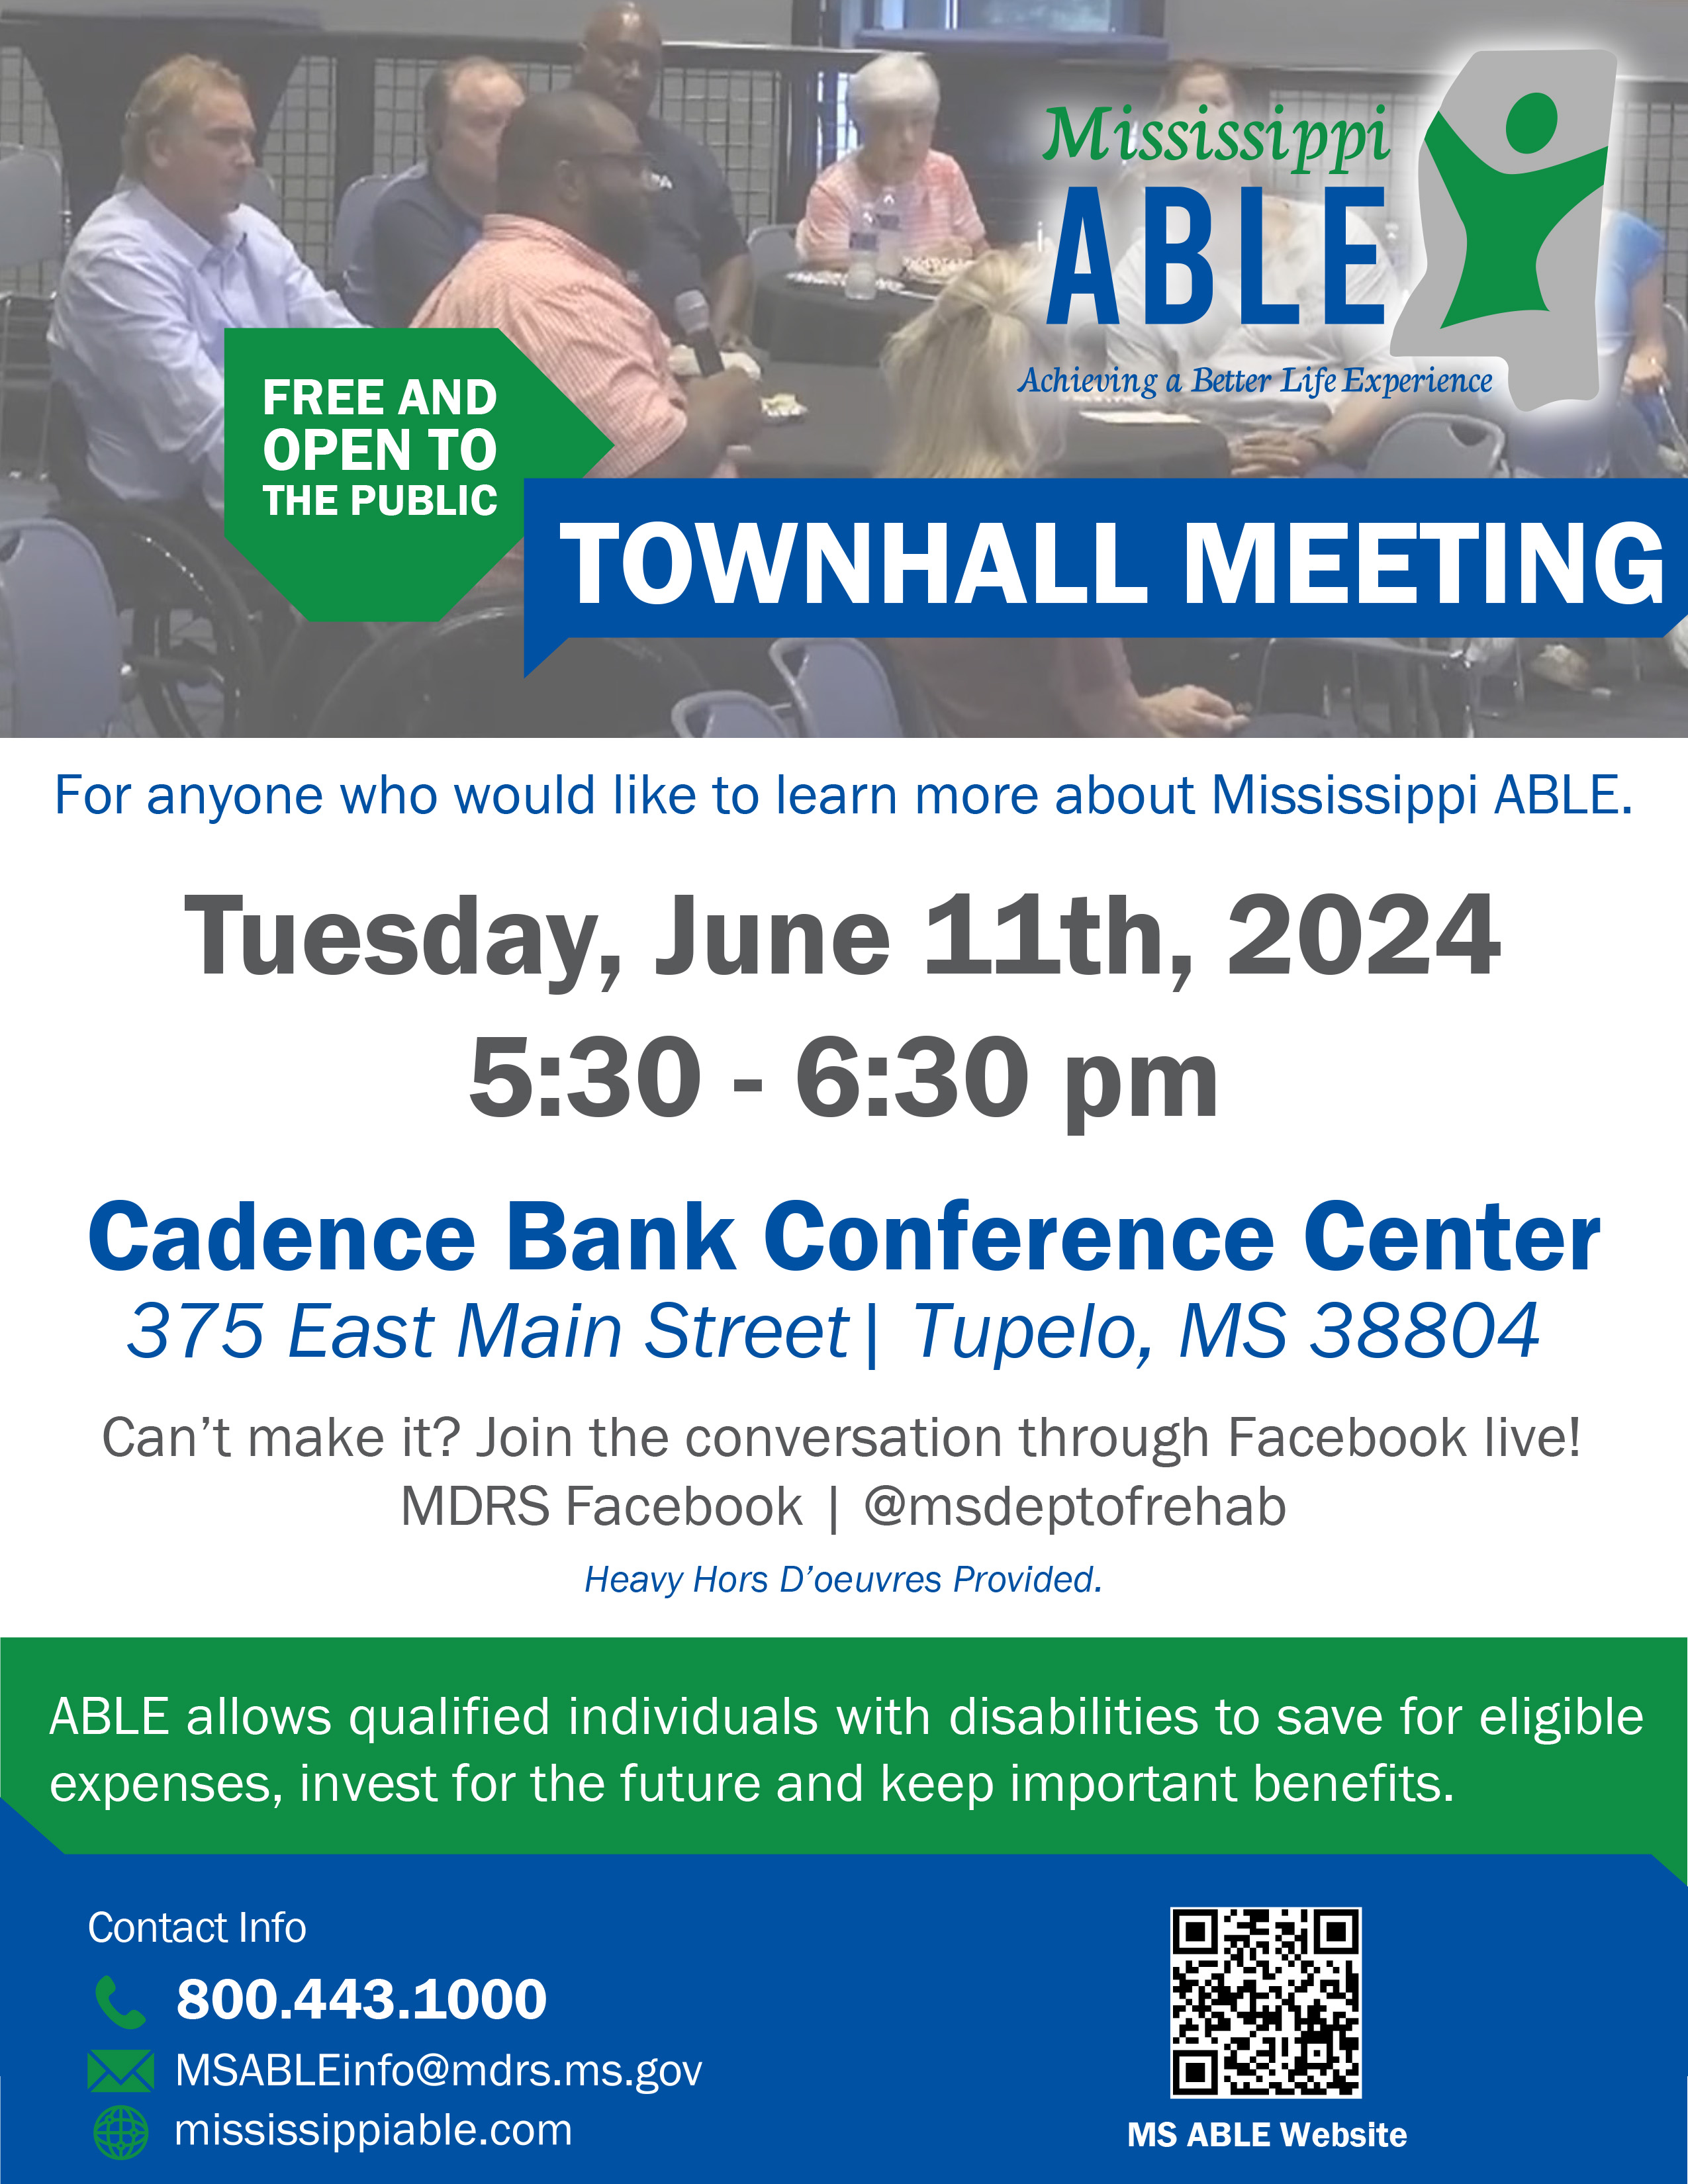 ABLE Townhall Meeting 2024